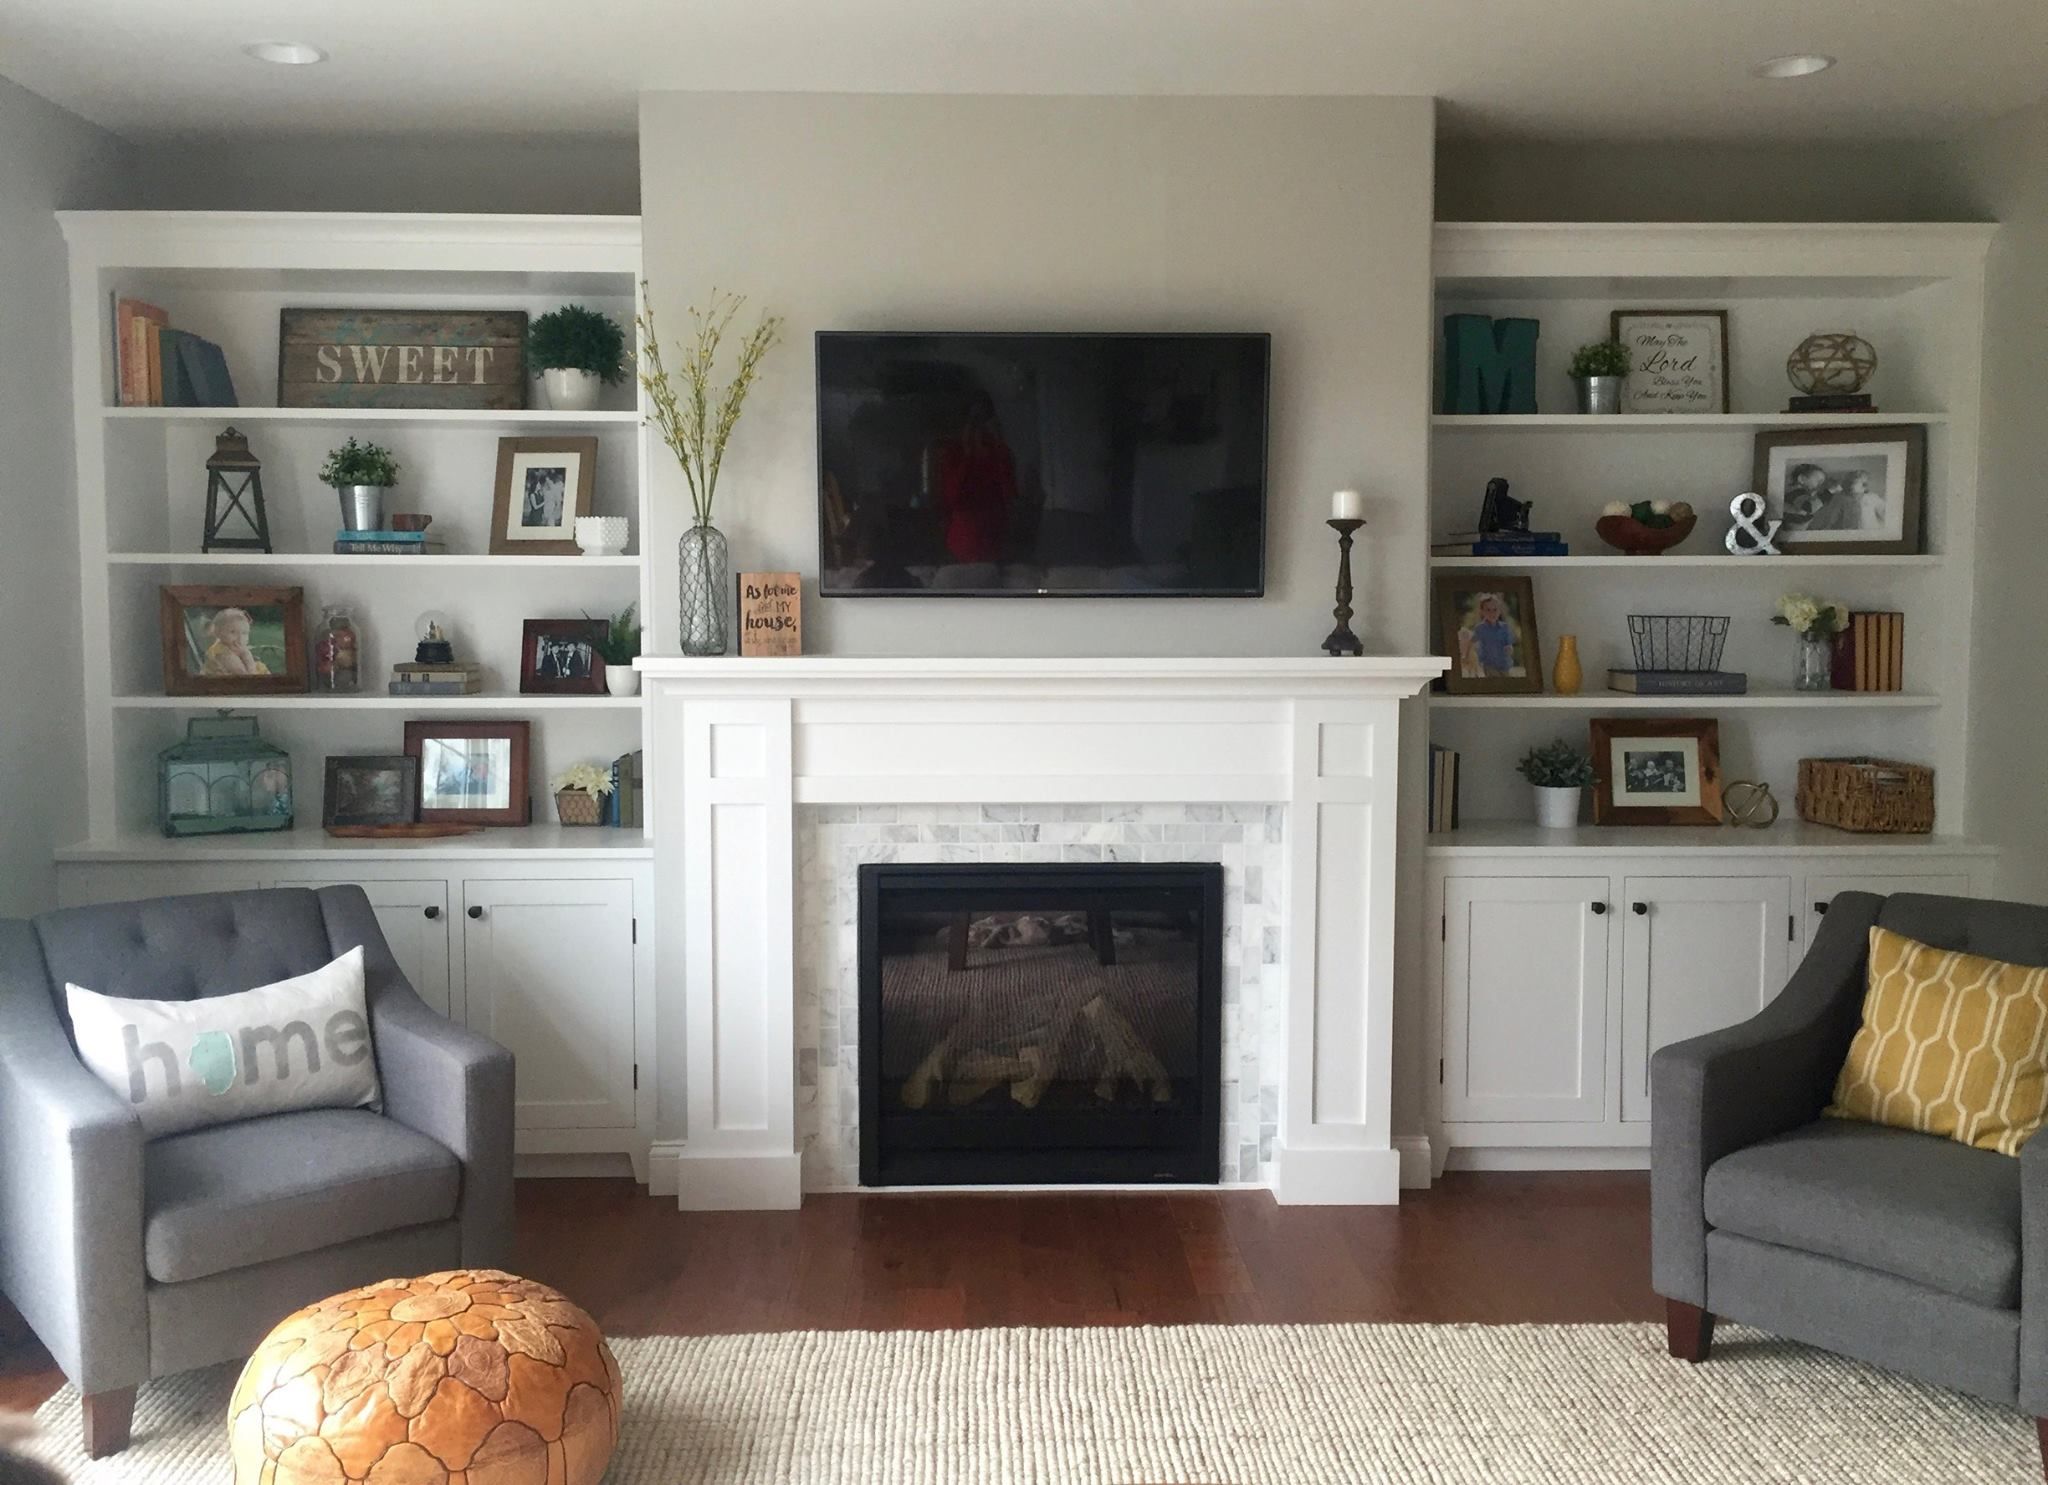 Gray Fireplace Mantel Fresh How to Build A Built In the Cabinets Woodworking